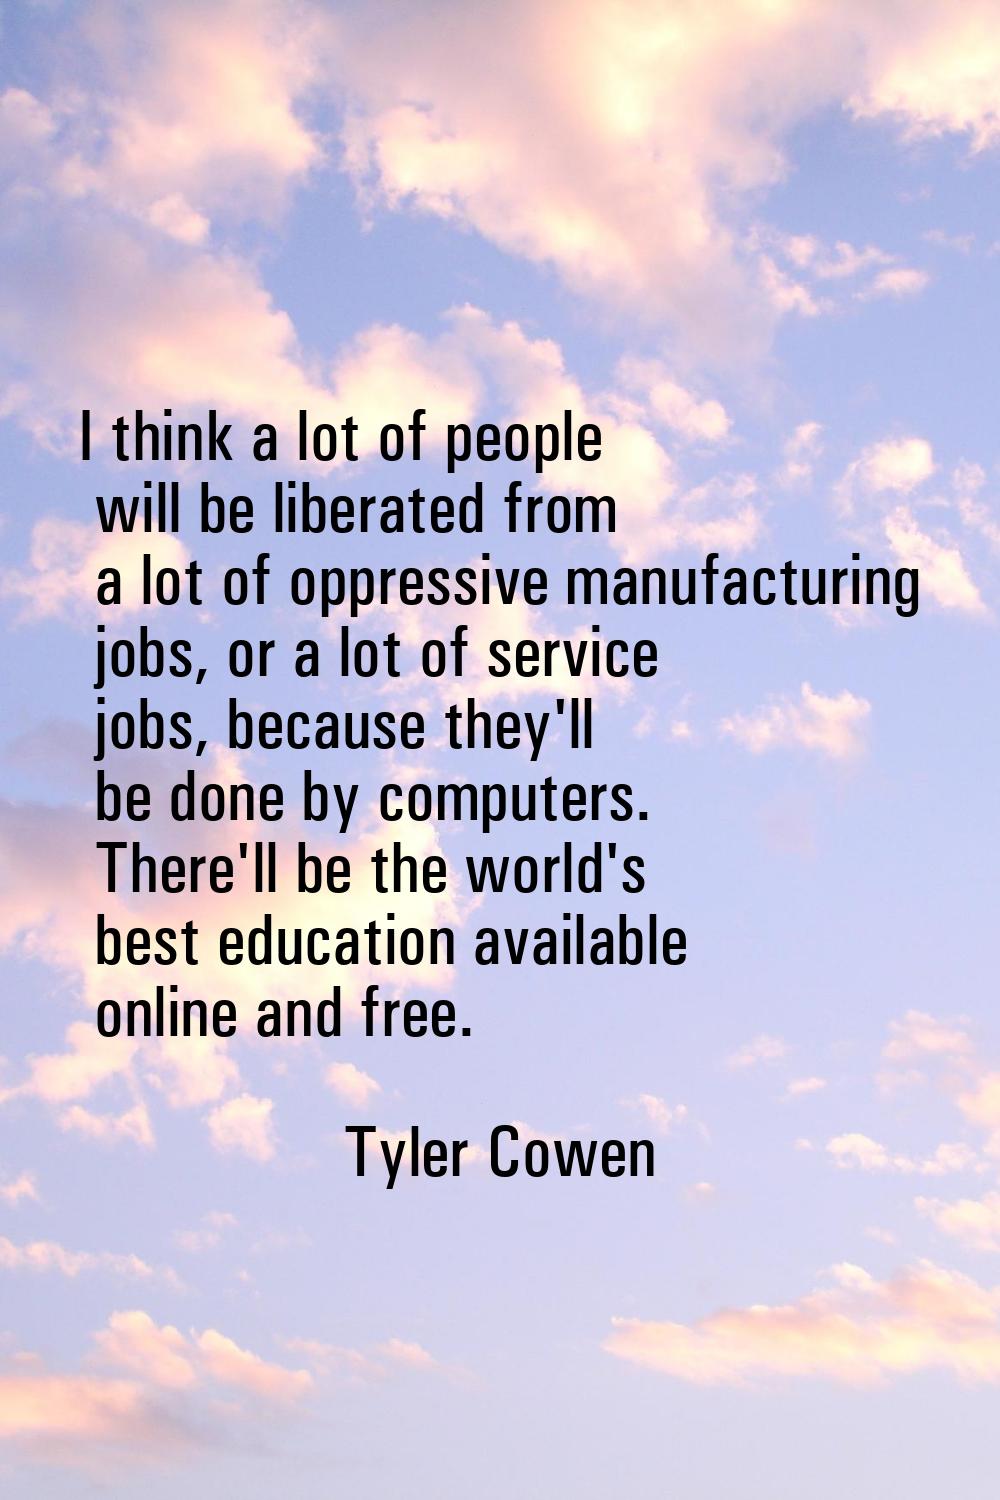 I think a lot of people will be liberated from a lot of oppressive manufacturing jobs, or a lot of 